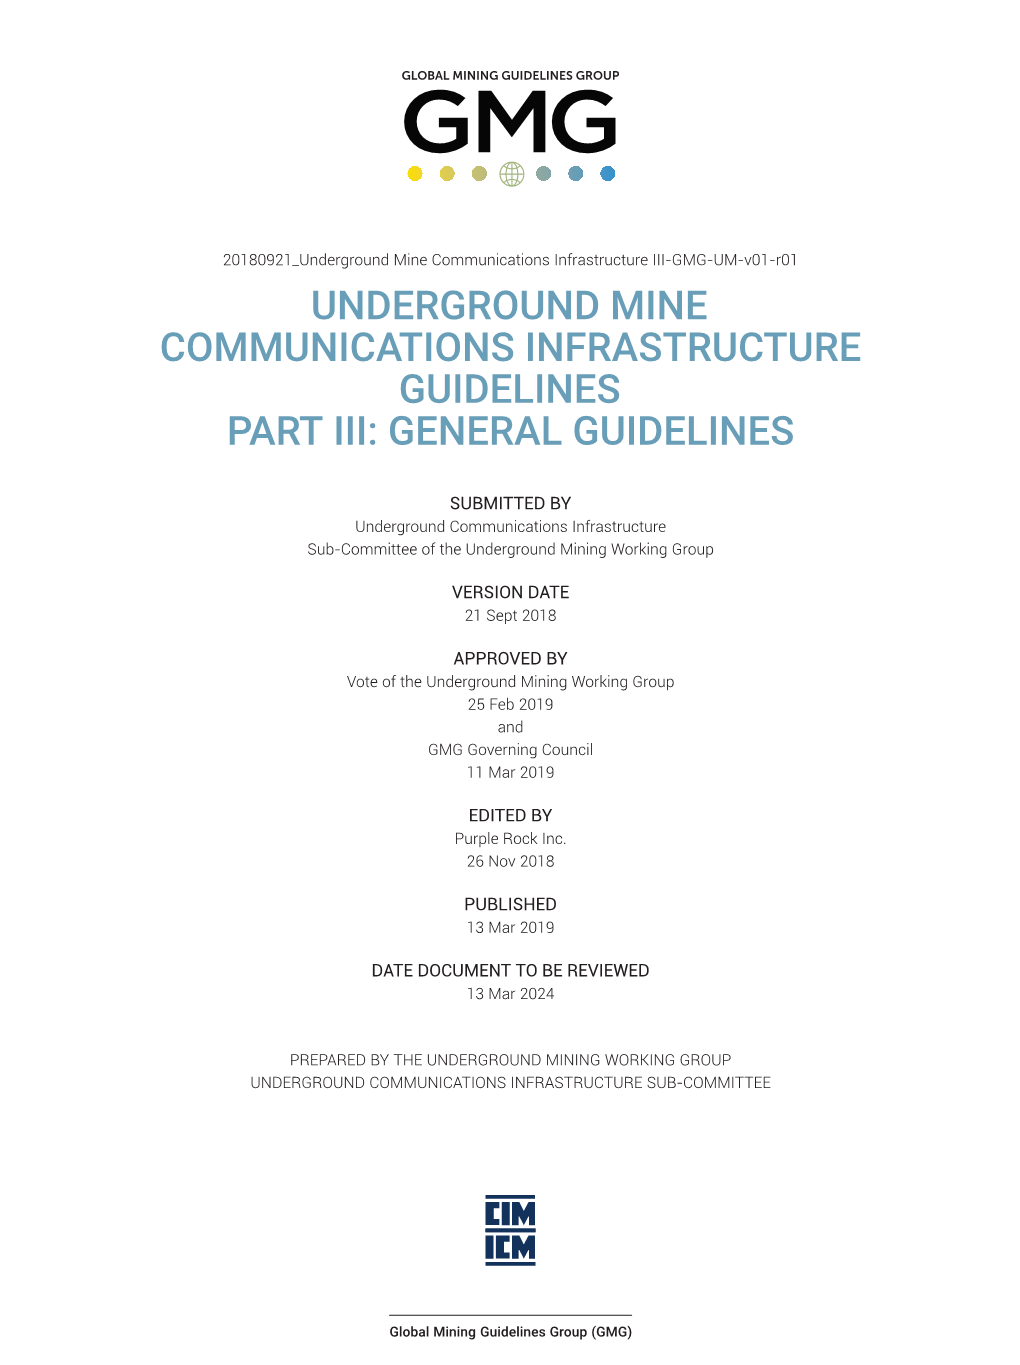 Underground Mine Communications Infrastructure Guidelines Part Iii: General Guidelines